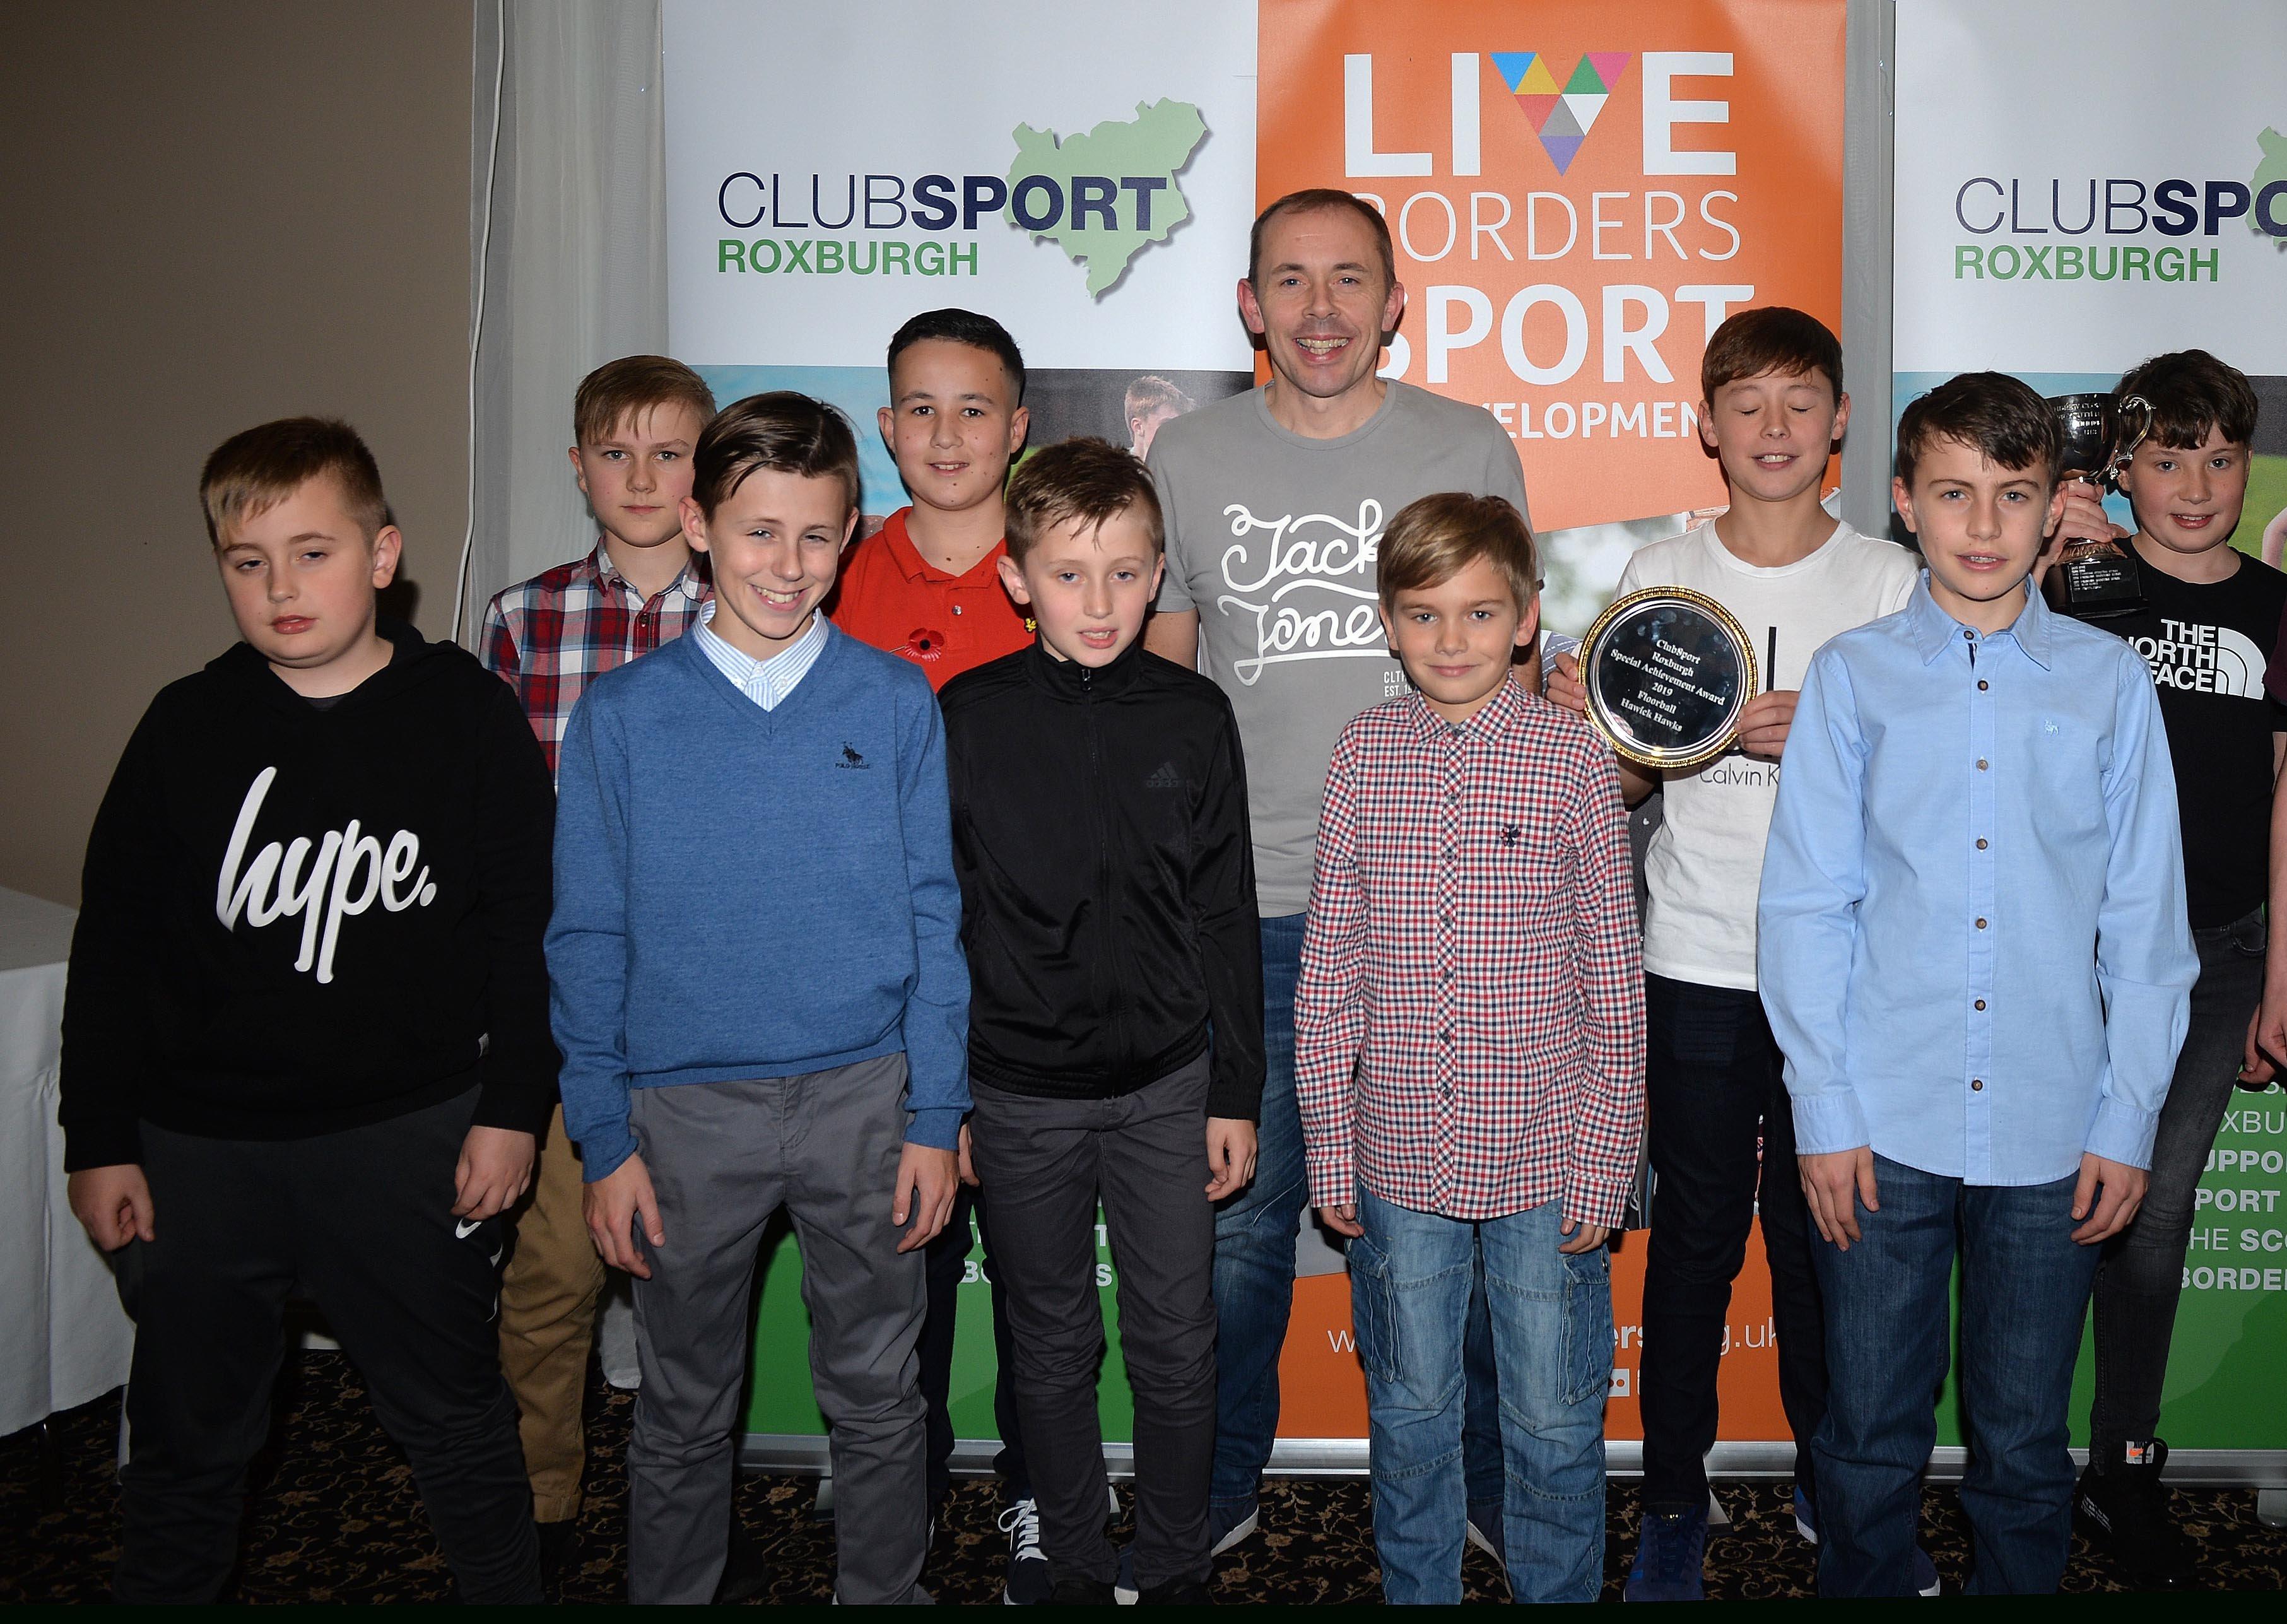 Coach of the Year, Craig Girvan, with players from the Hawick Hawks floorball team.